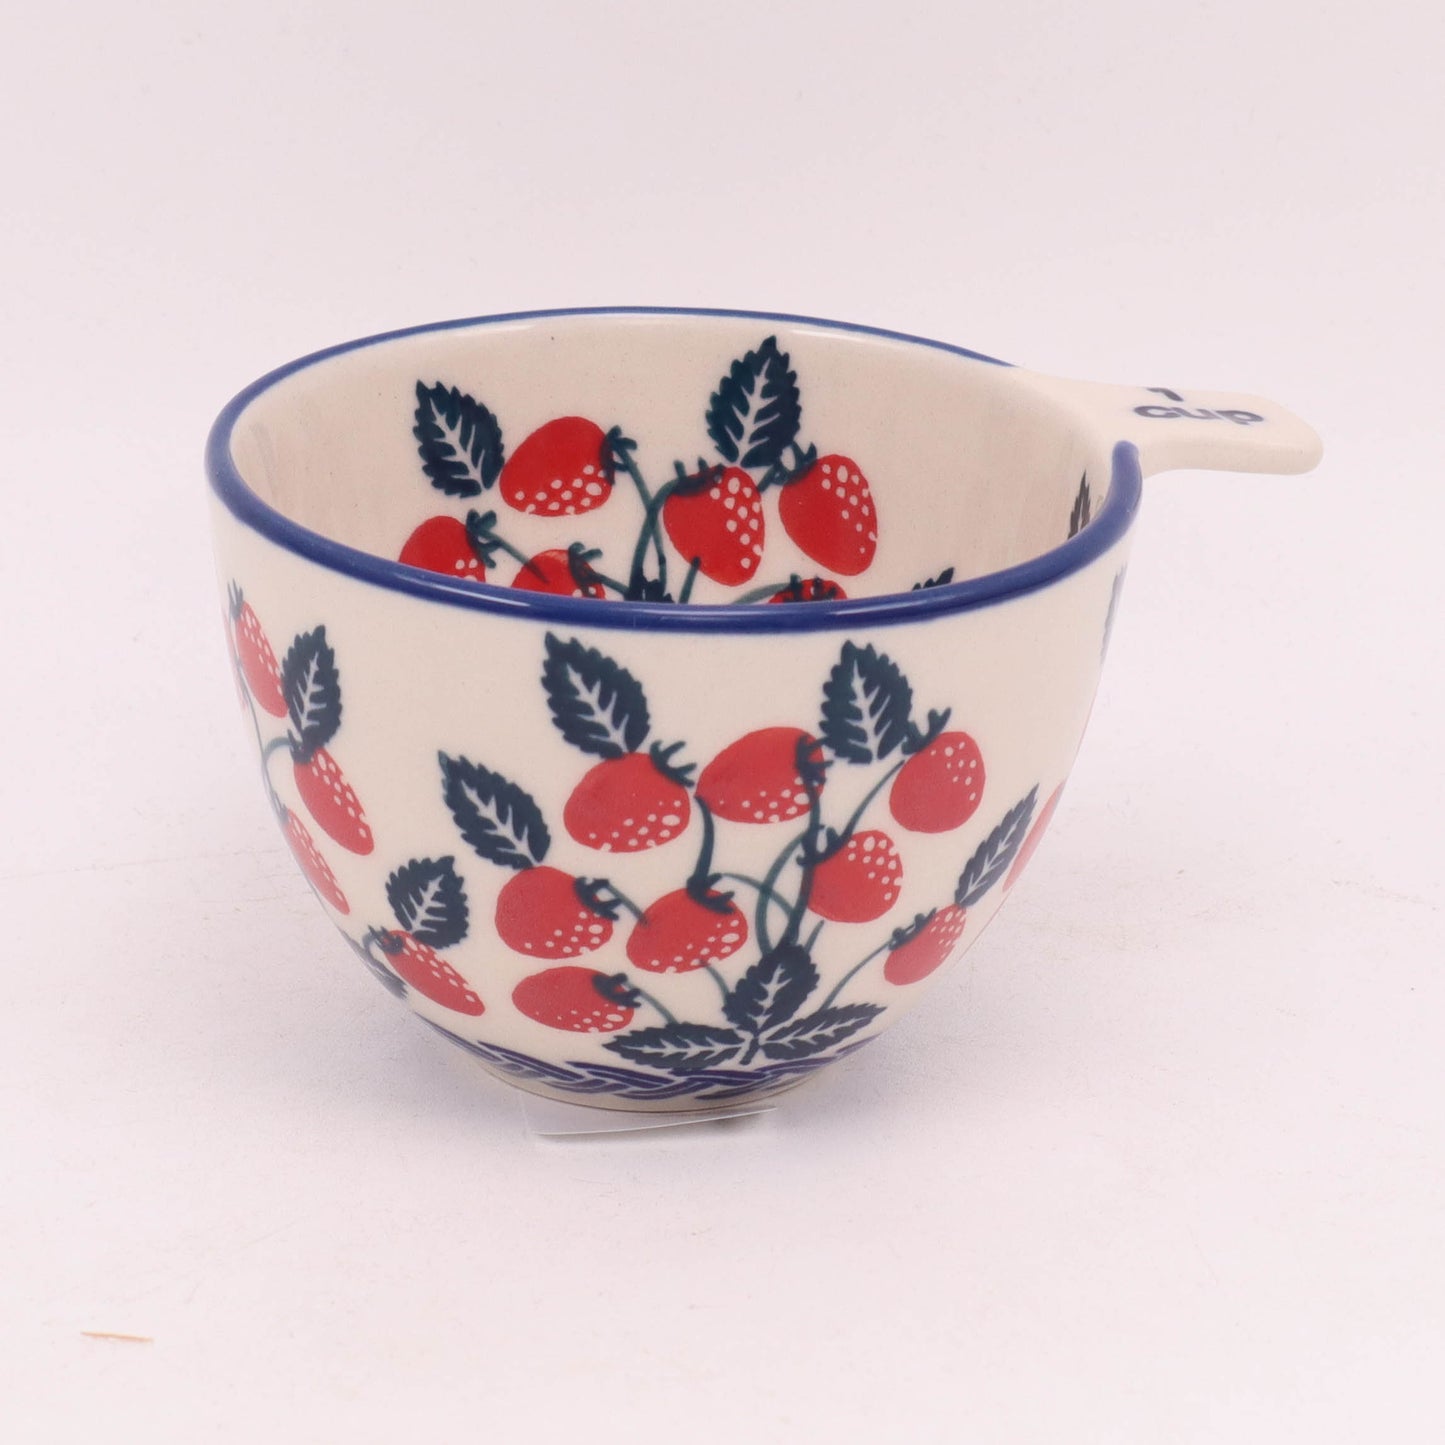 1 Cup Measuring Cup. Pattern: Strawberry Jam